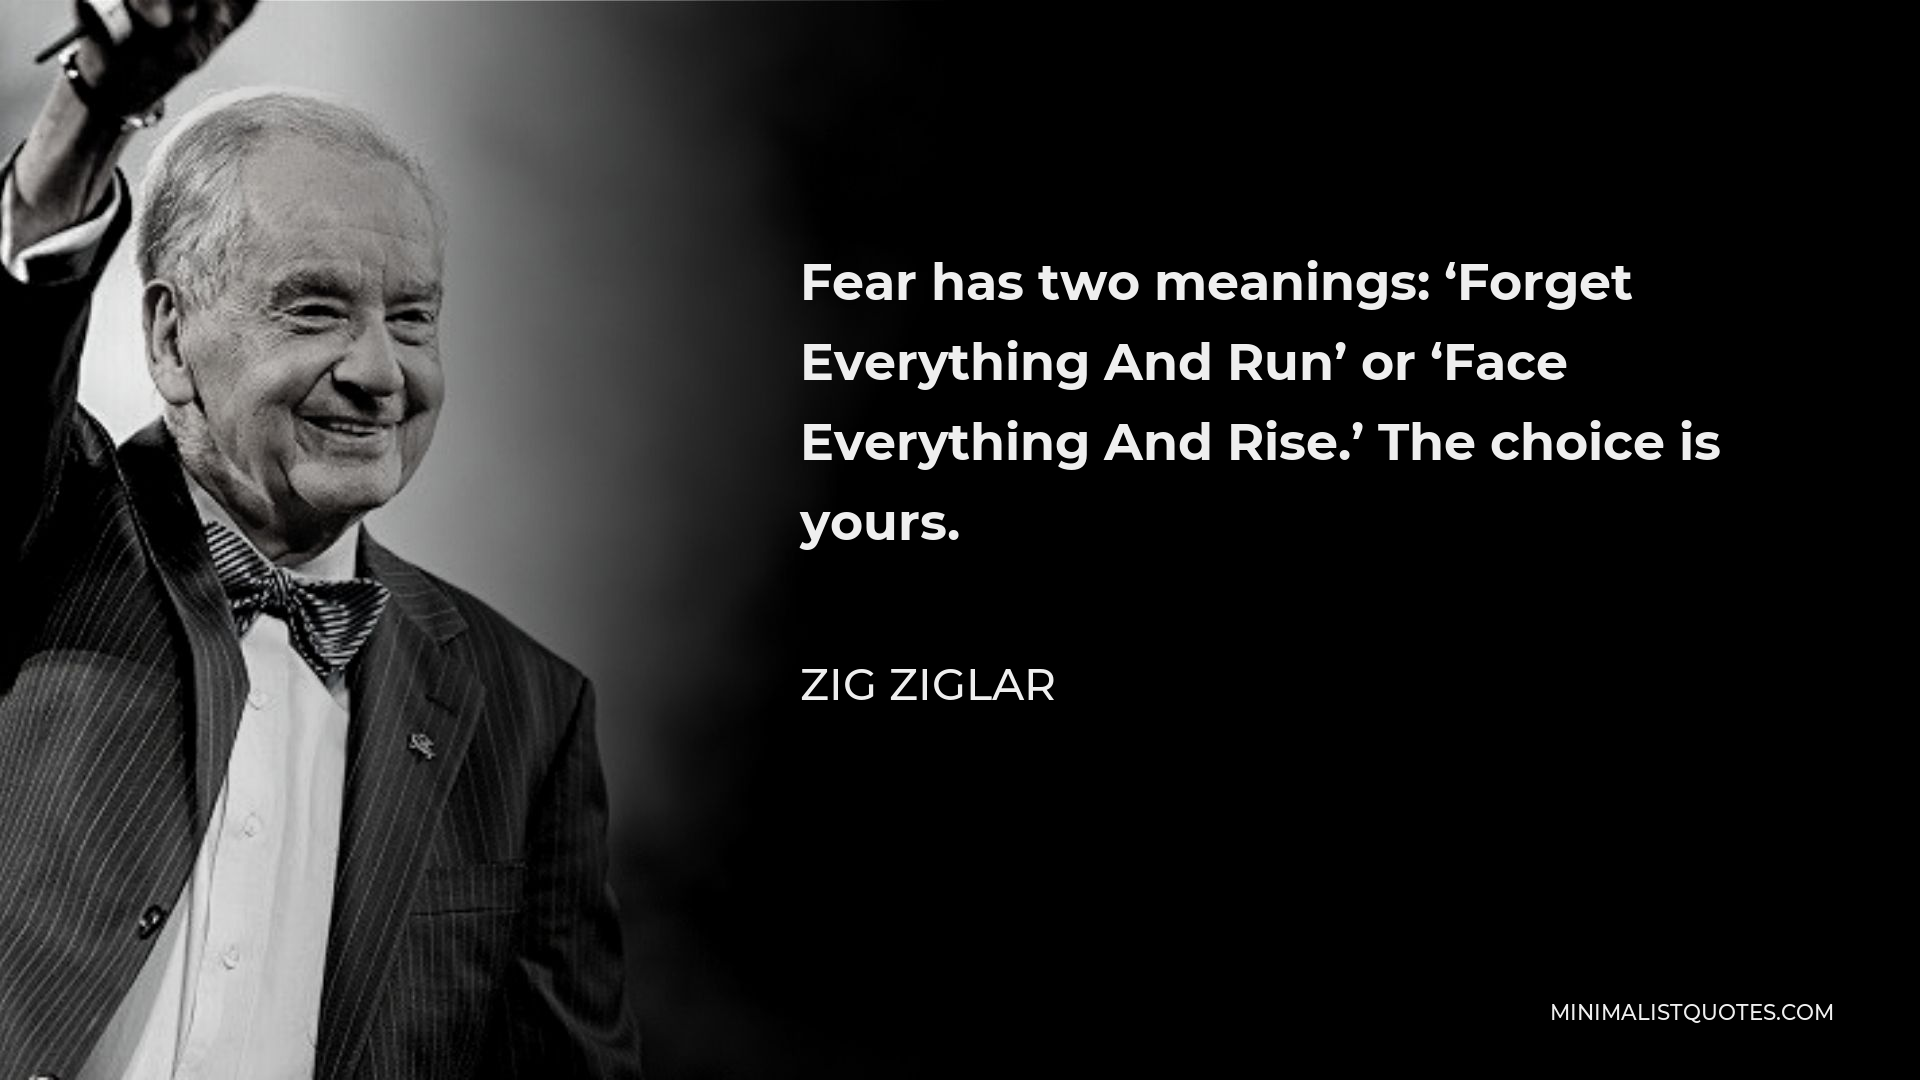 Zig Ziglar Quote - Fear has two meanings: ‘Forget Everything And Run’ or ‘Face Everything And Rise.’ The choice is yours.